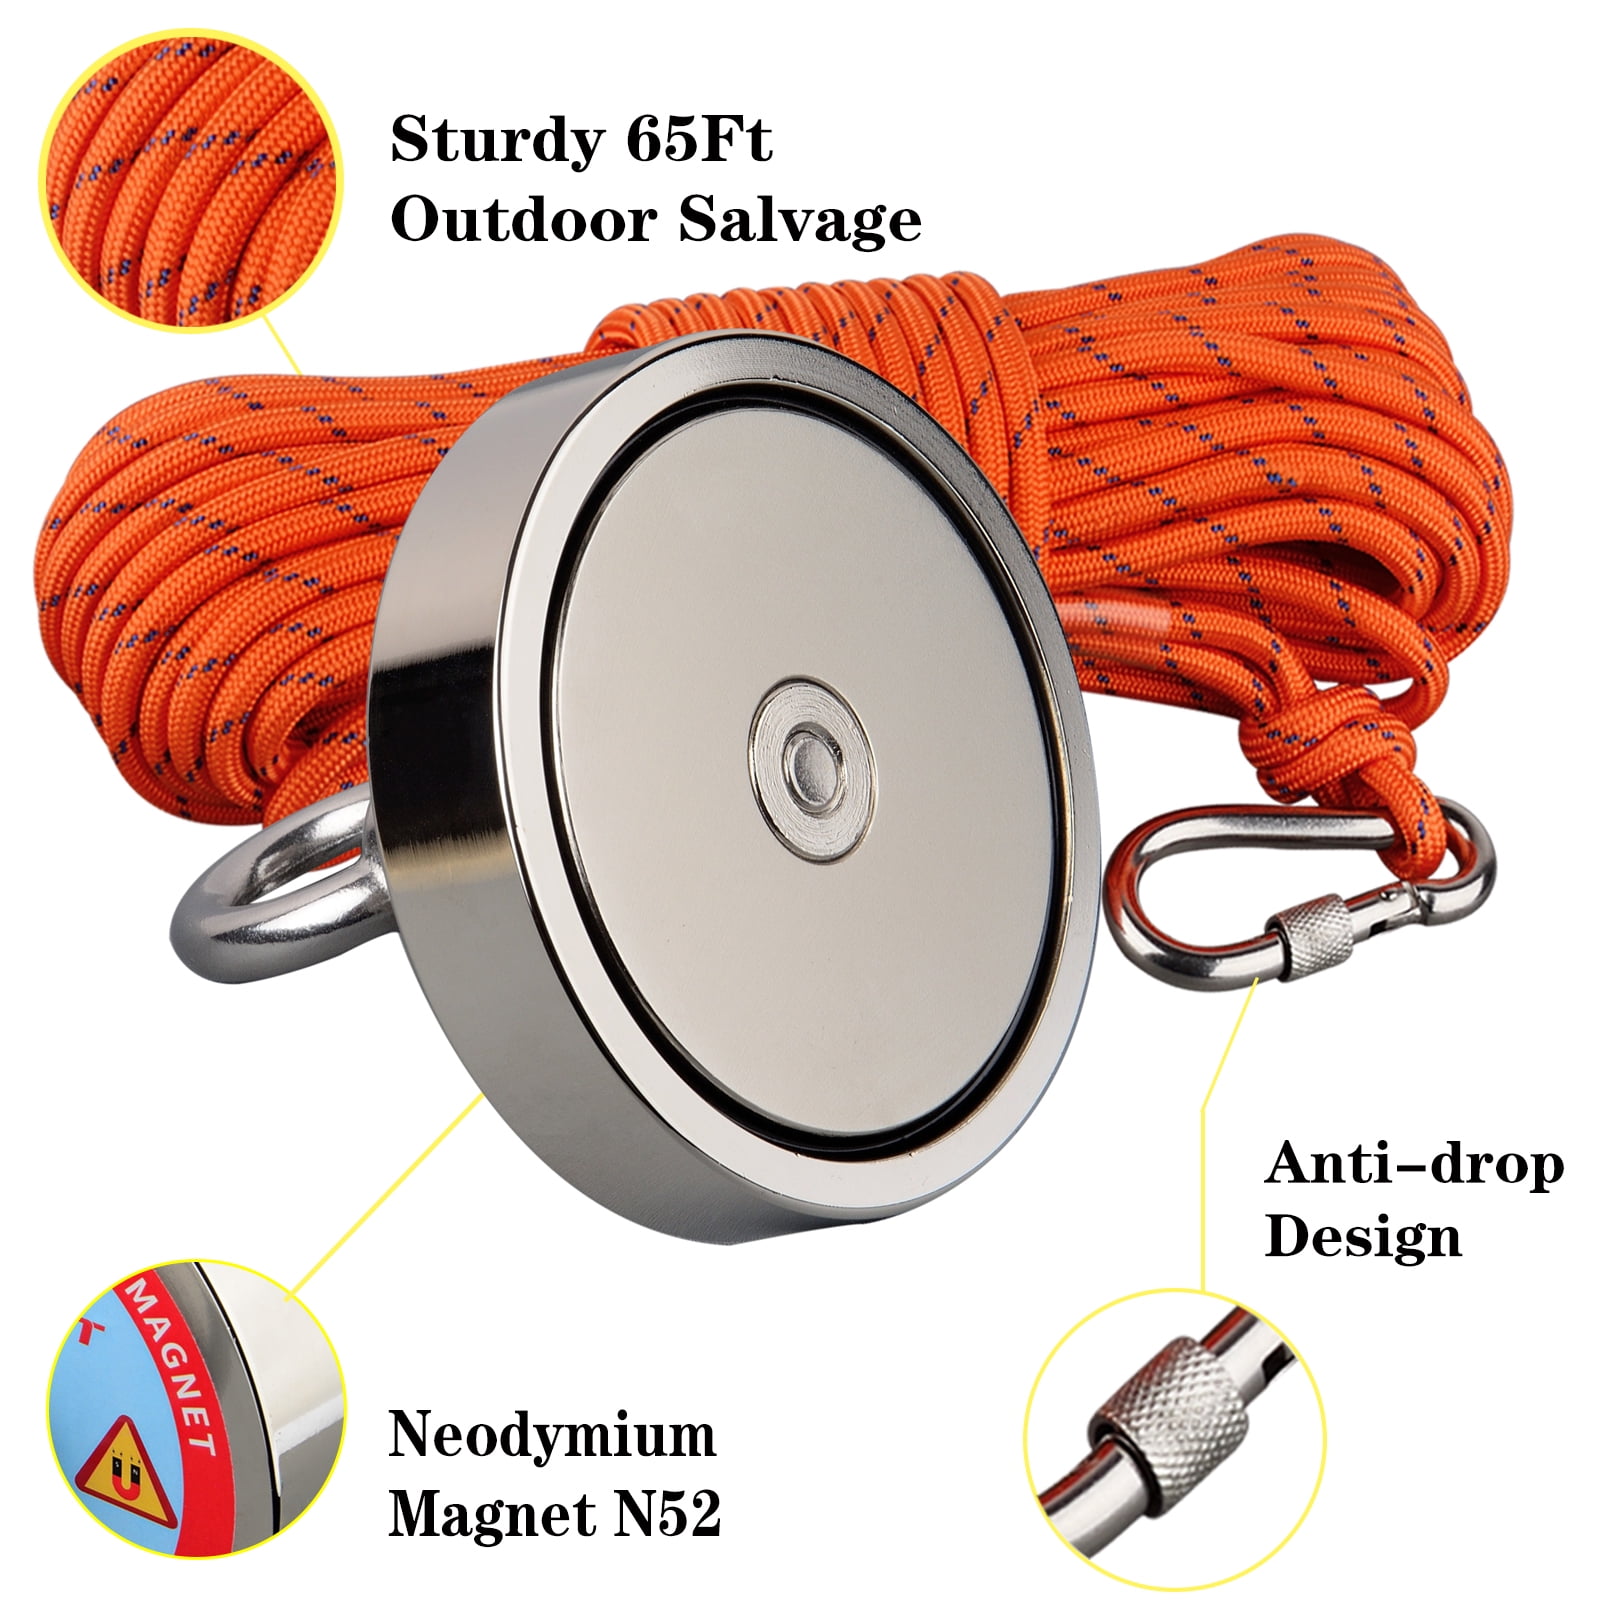 Gerguirry Double Sided Magnet Fishing Kit - 1200 lbs(544KG) Heavy Duty  Neodymium Magnet N52 - Includes Grappling Hook,100FT Rope, Adhesive Tape,  Gloves, Threadlocker : : Industrial & Scientific